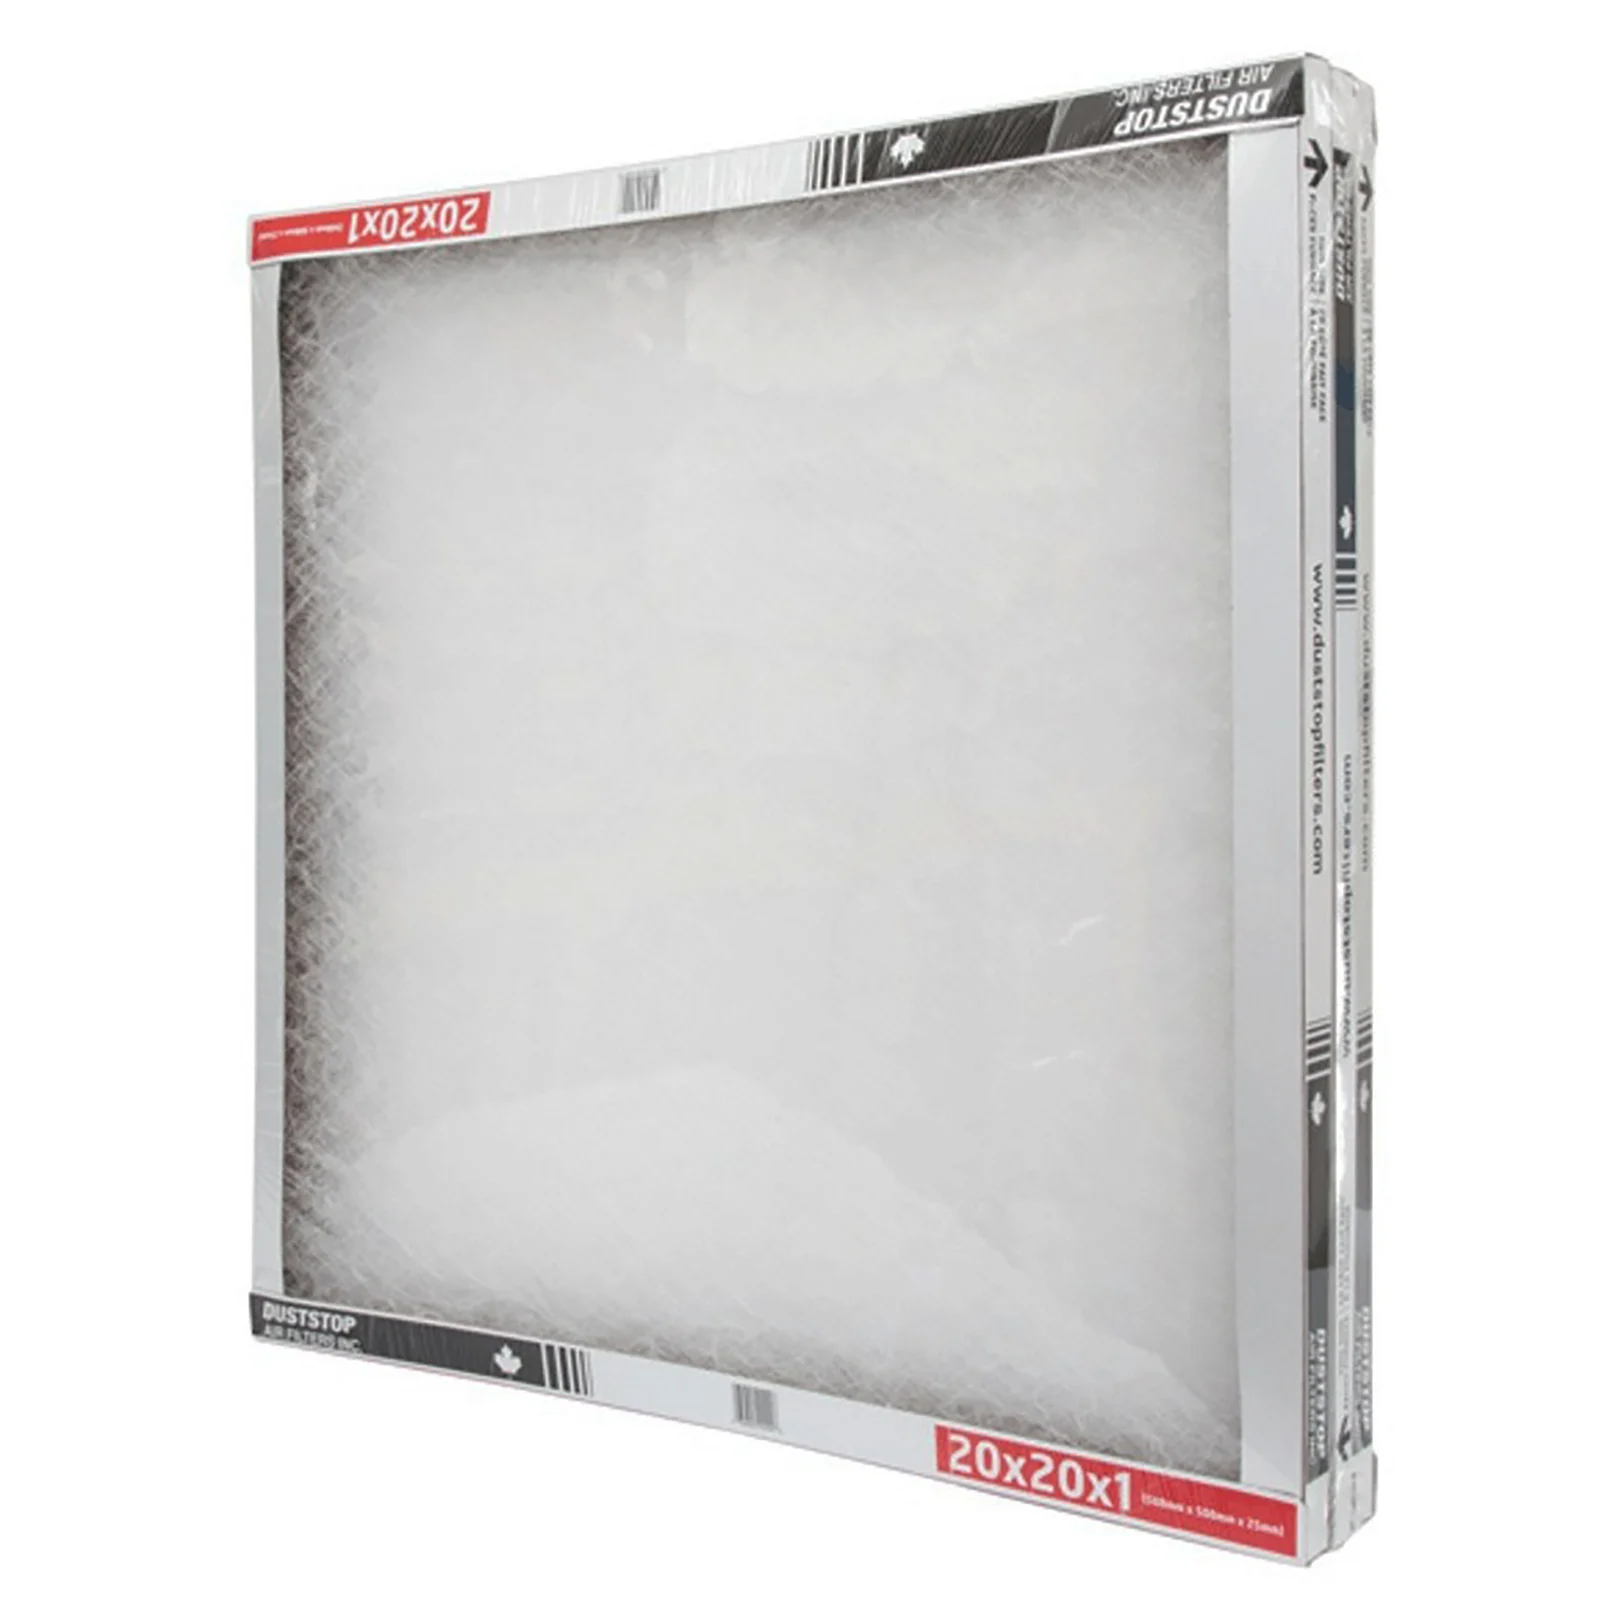 A disposable furnace filter